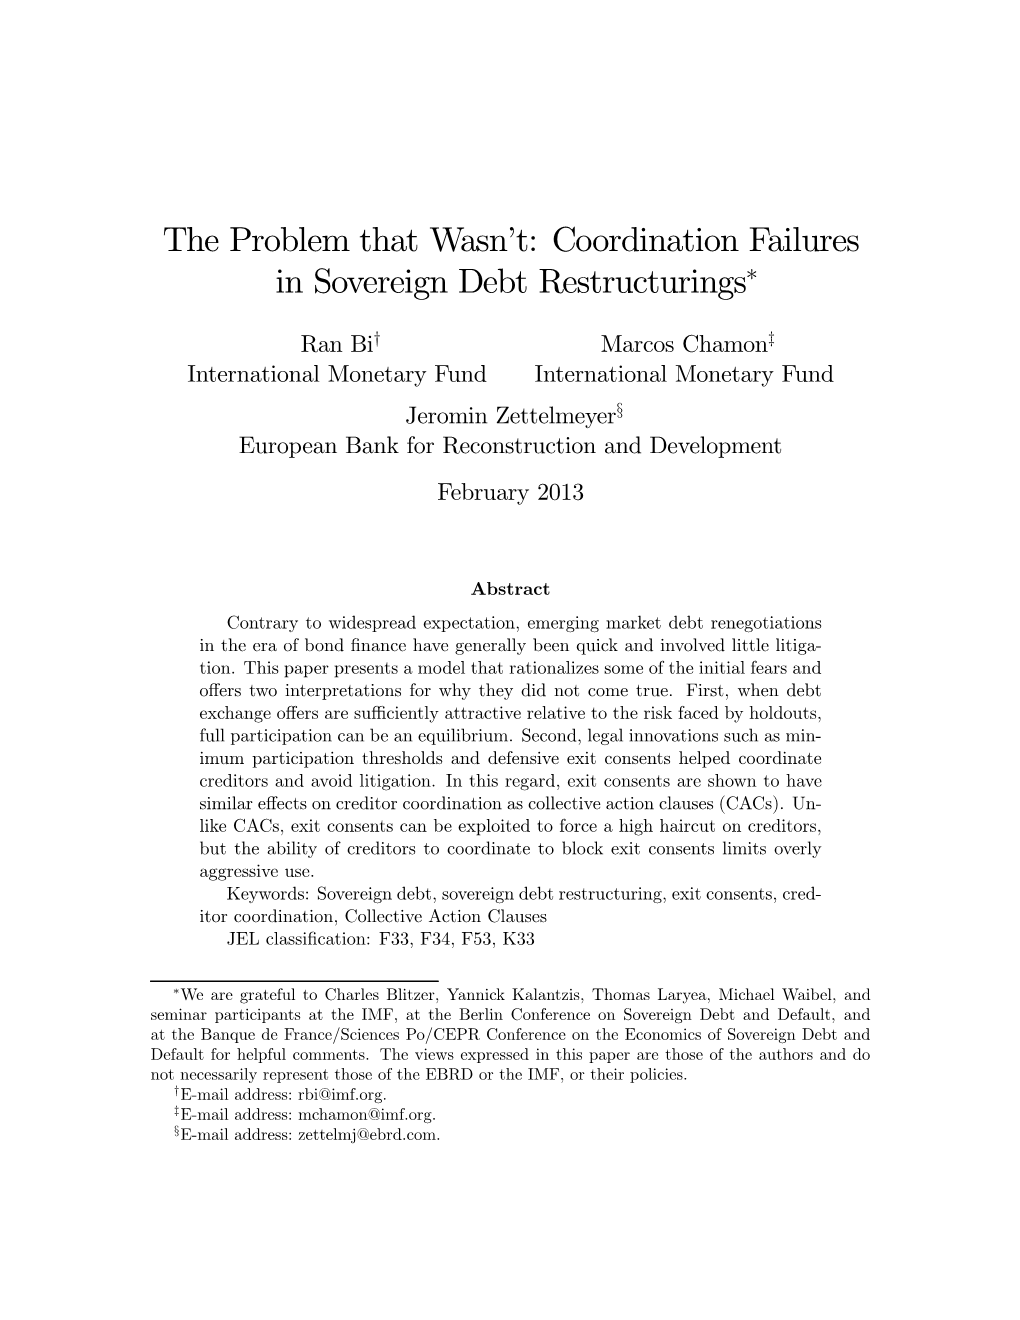 The Problem That Wasn't: Coordination Failures in Sovereign Debt